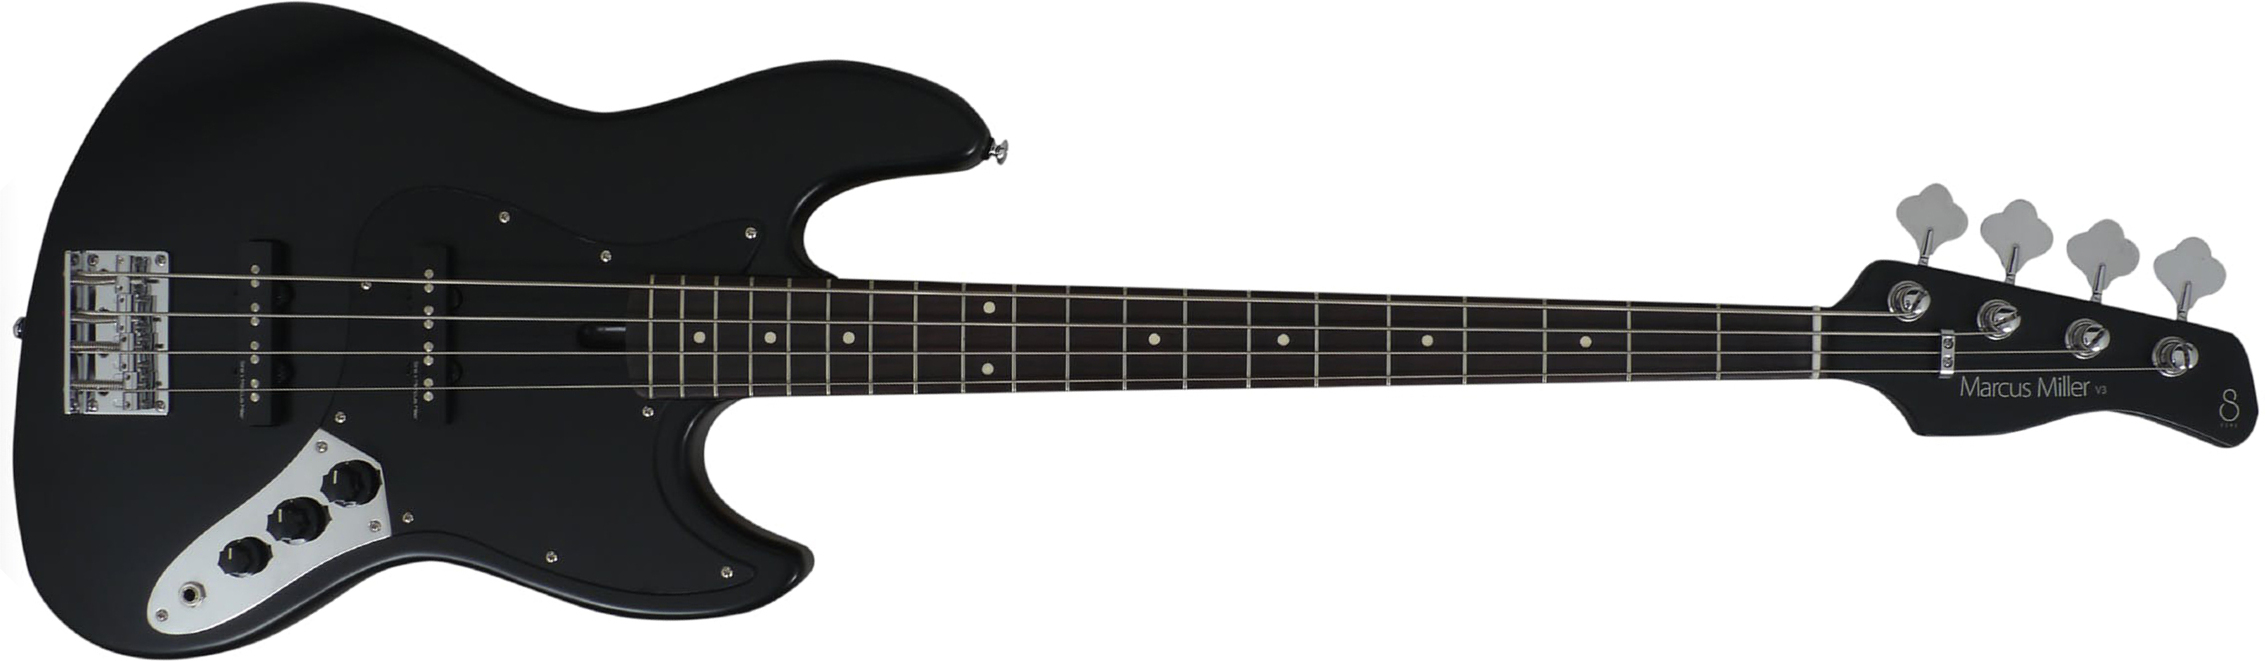 Marcus Miller V3p 4st Rw - Black Satin - Solidbody E-bass - Main picture